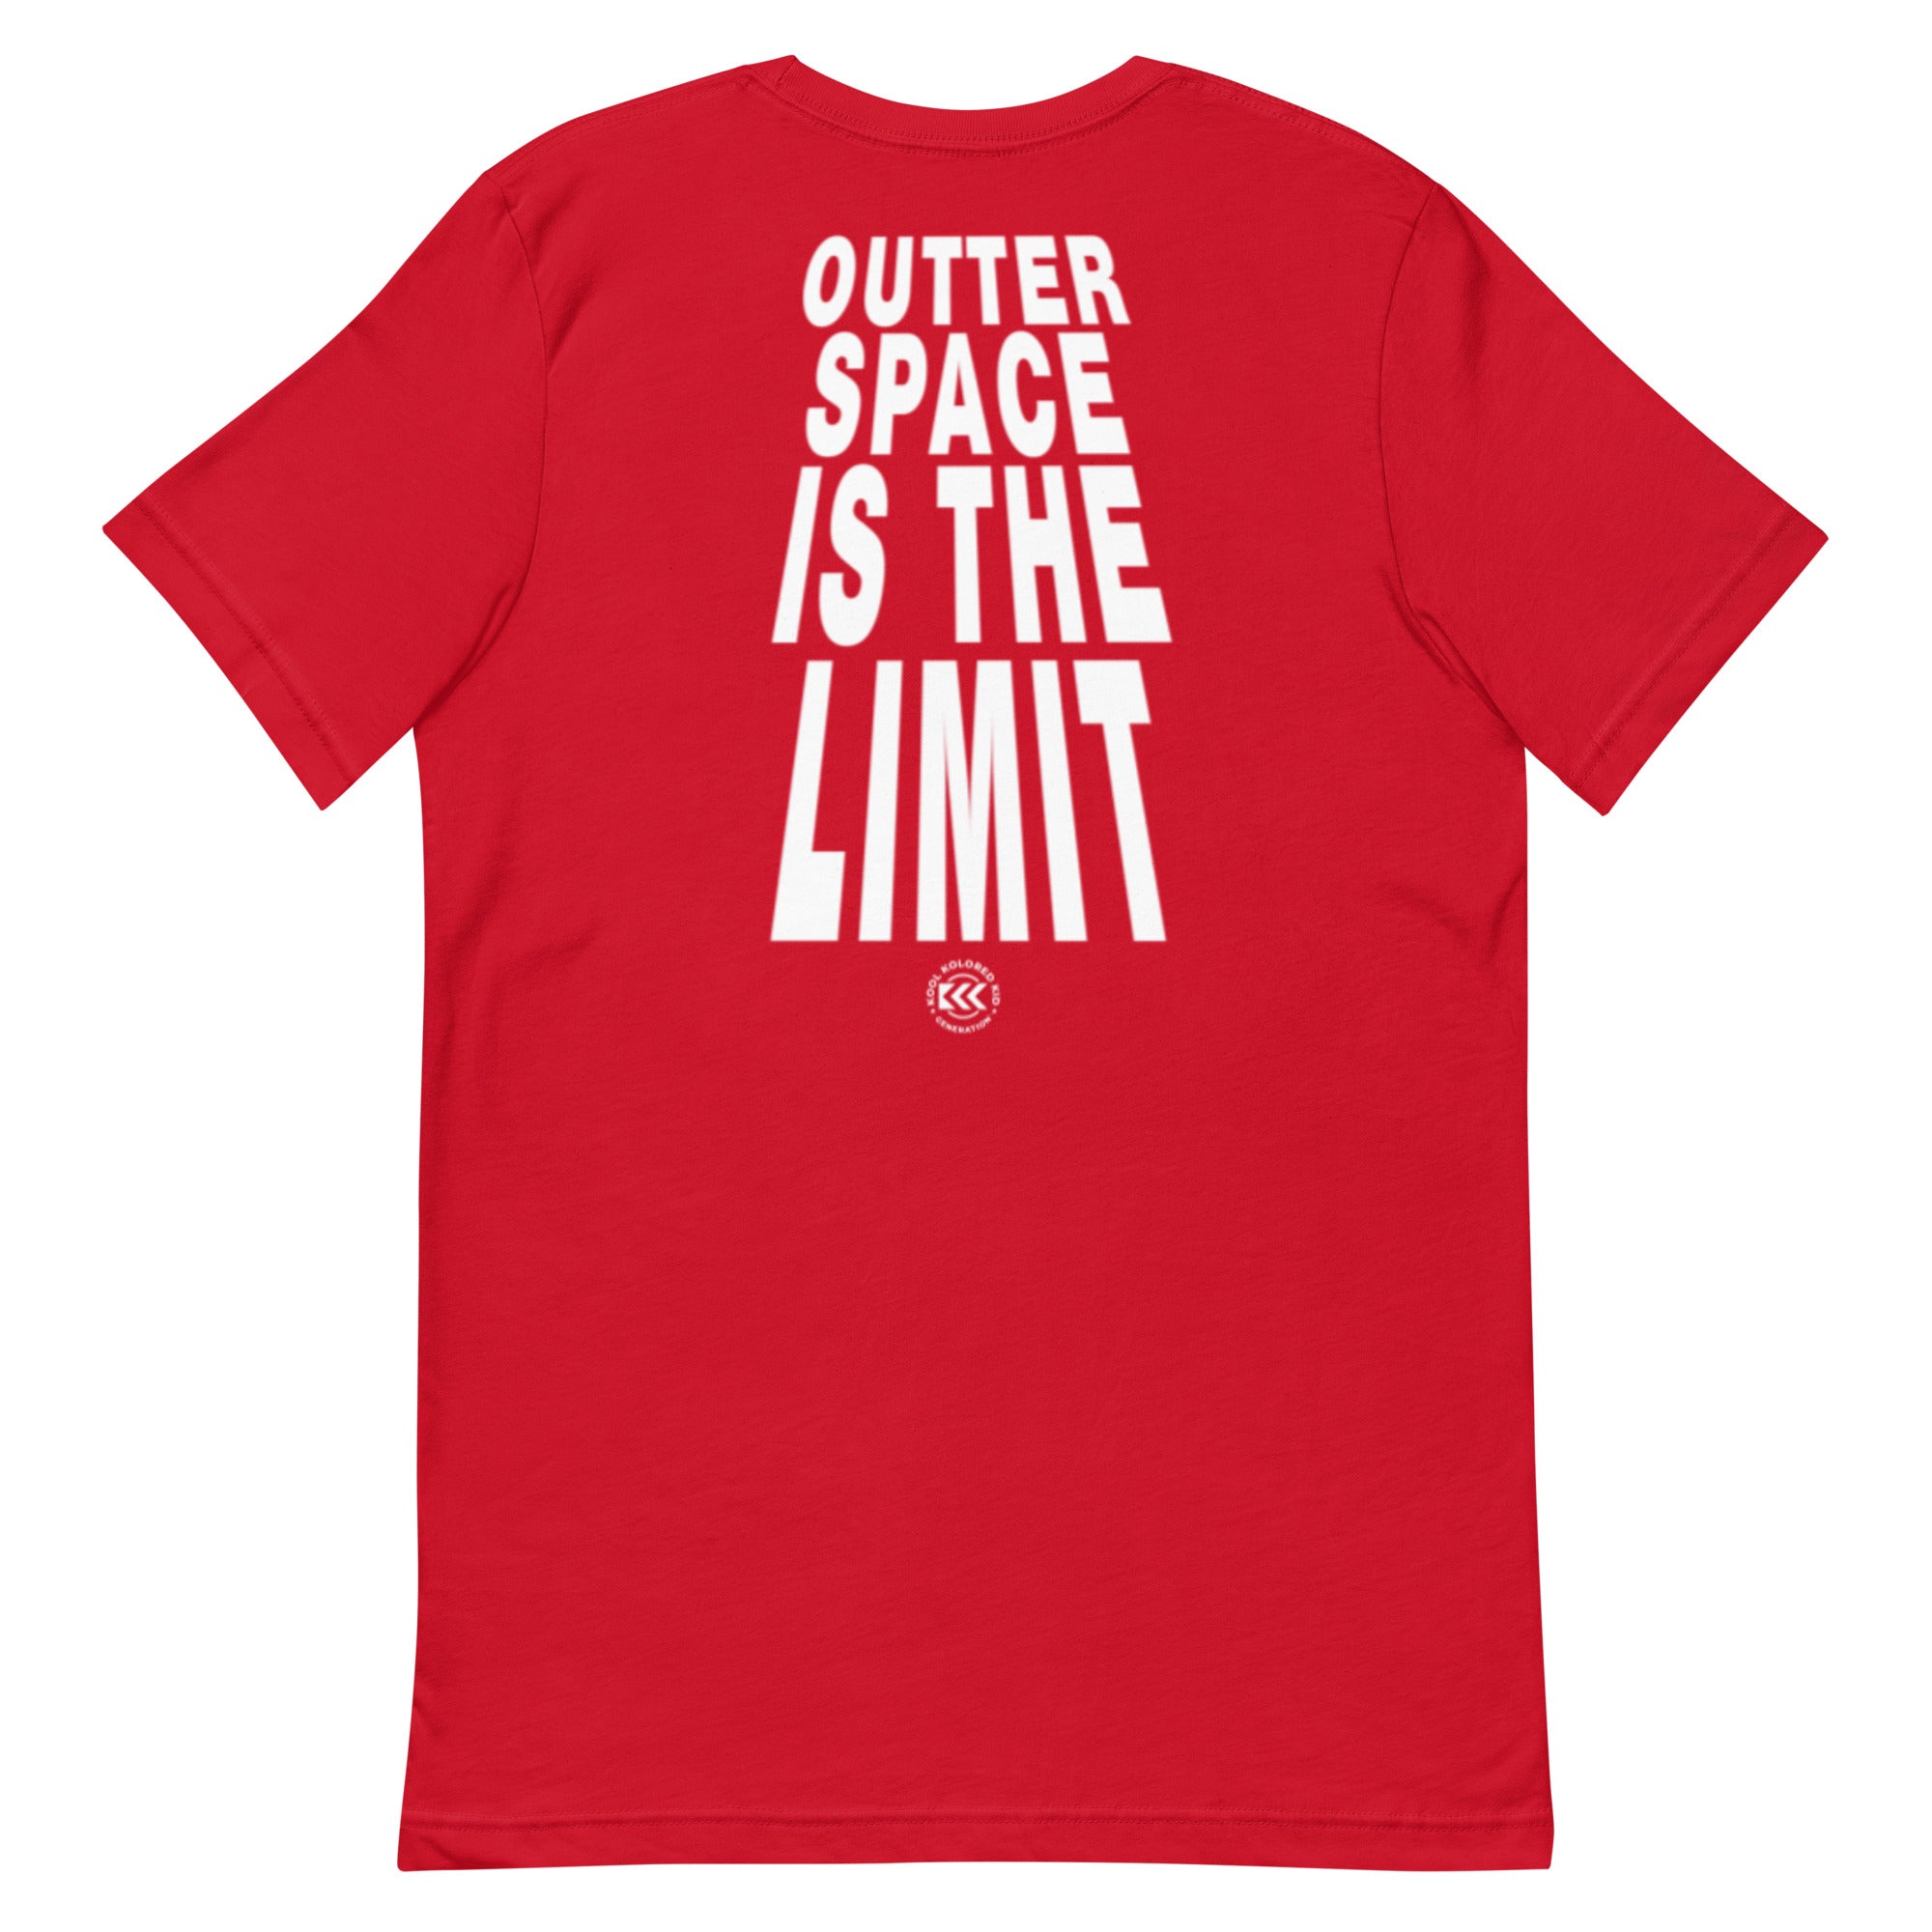 Kool World - Outer Space is the limit Tee